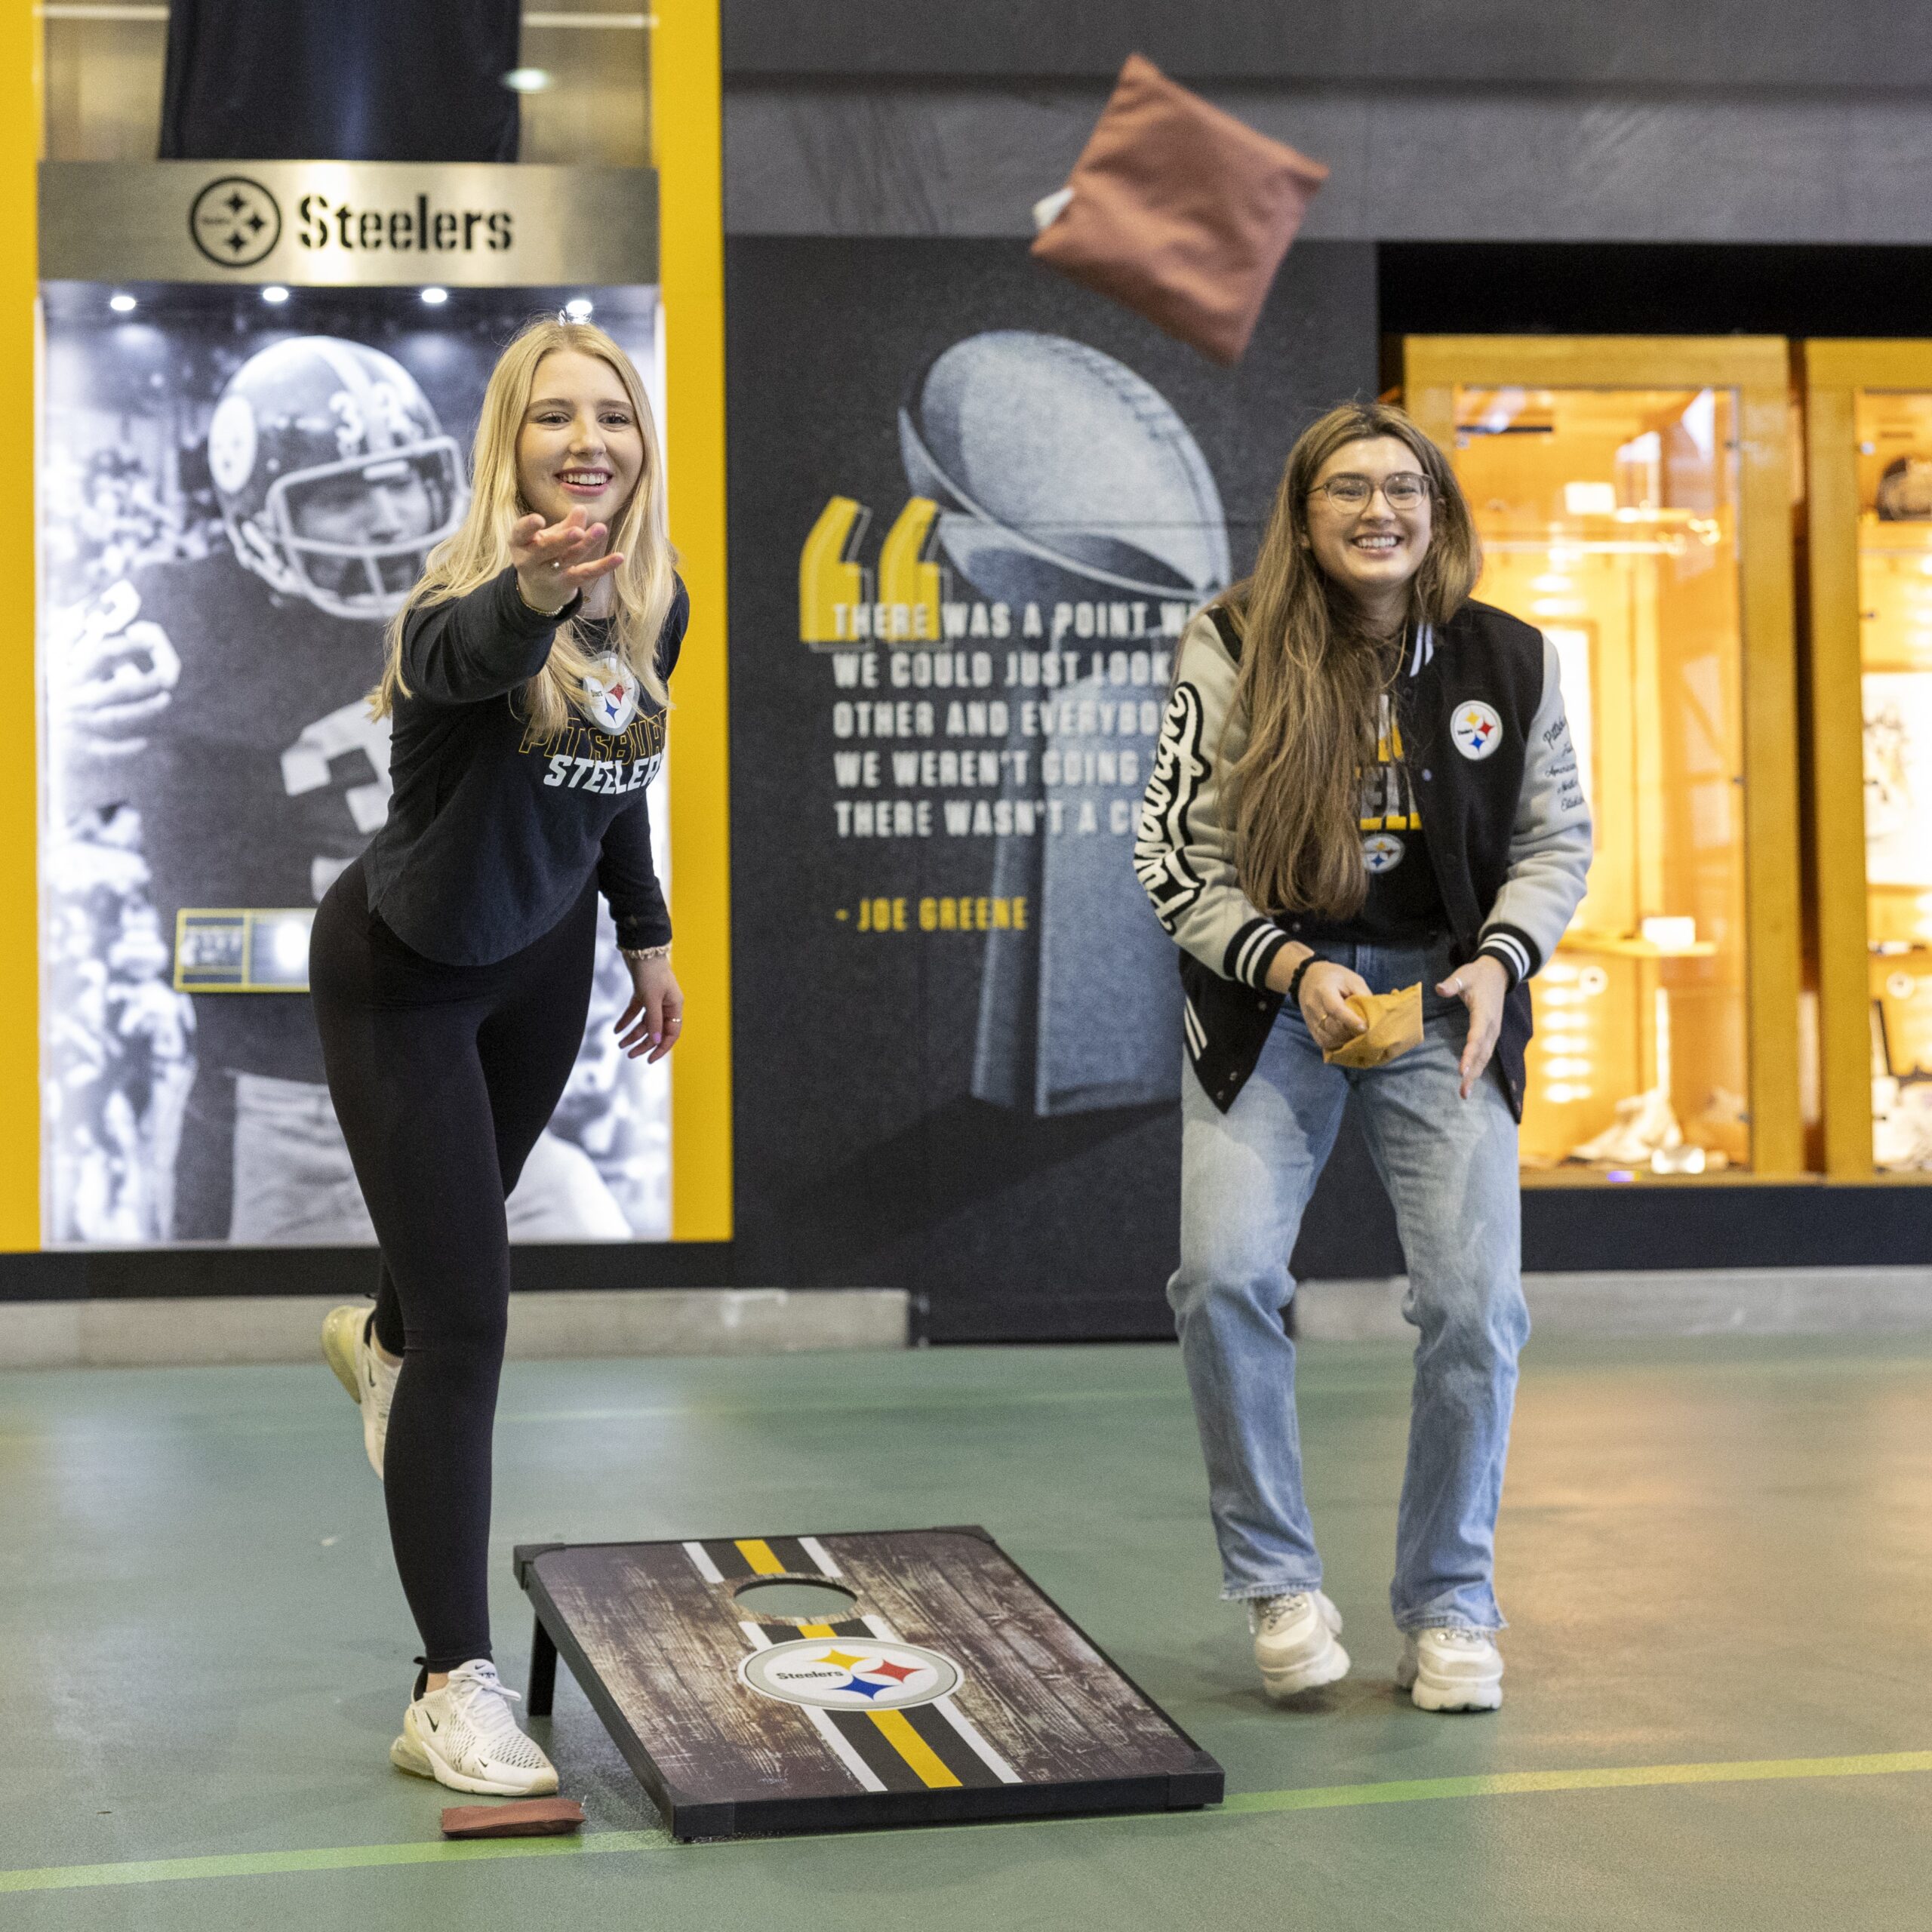 A photo of two women playing cornhole in the FedEx Great Hall at Acrisure Stadium during the SteelHERS Social.